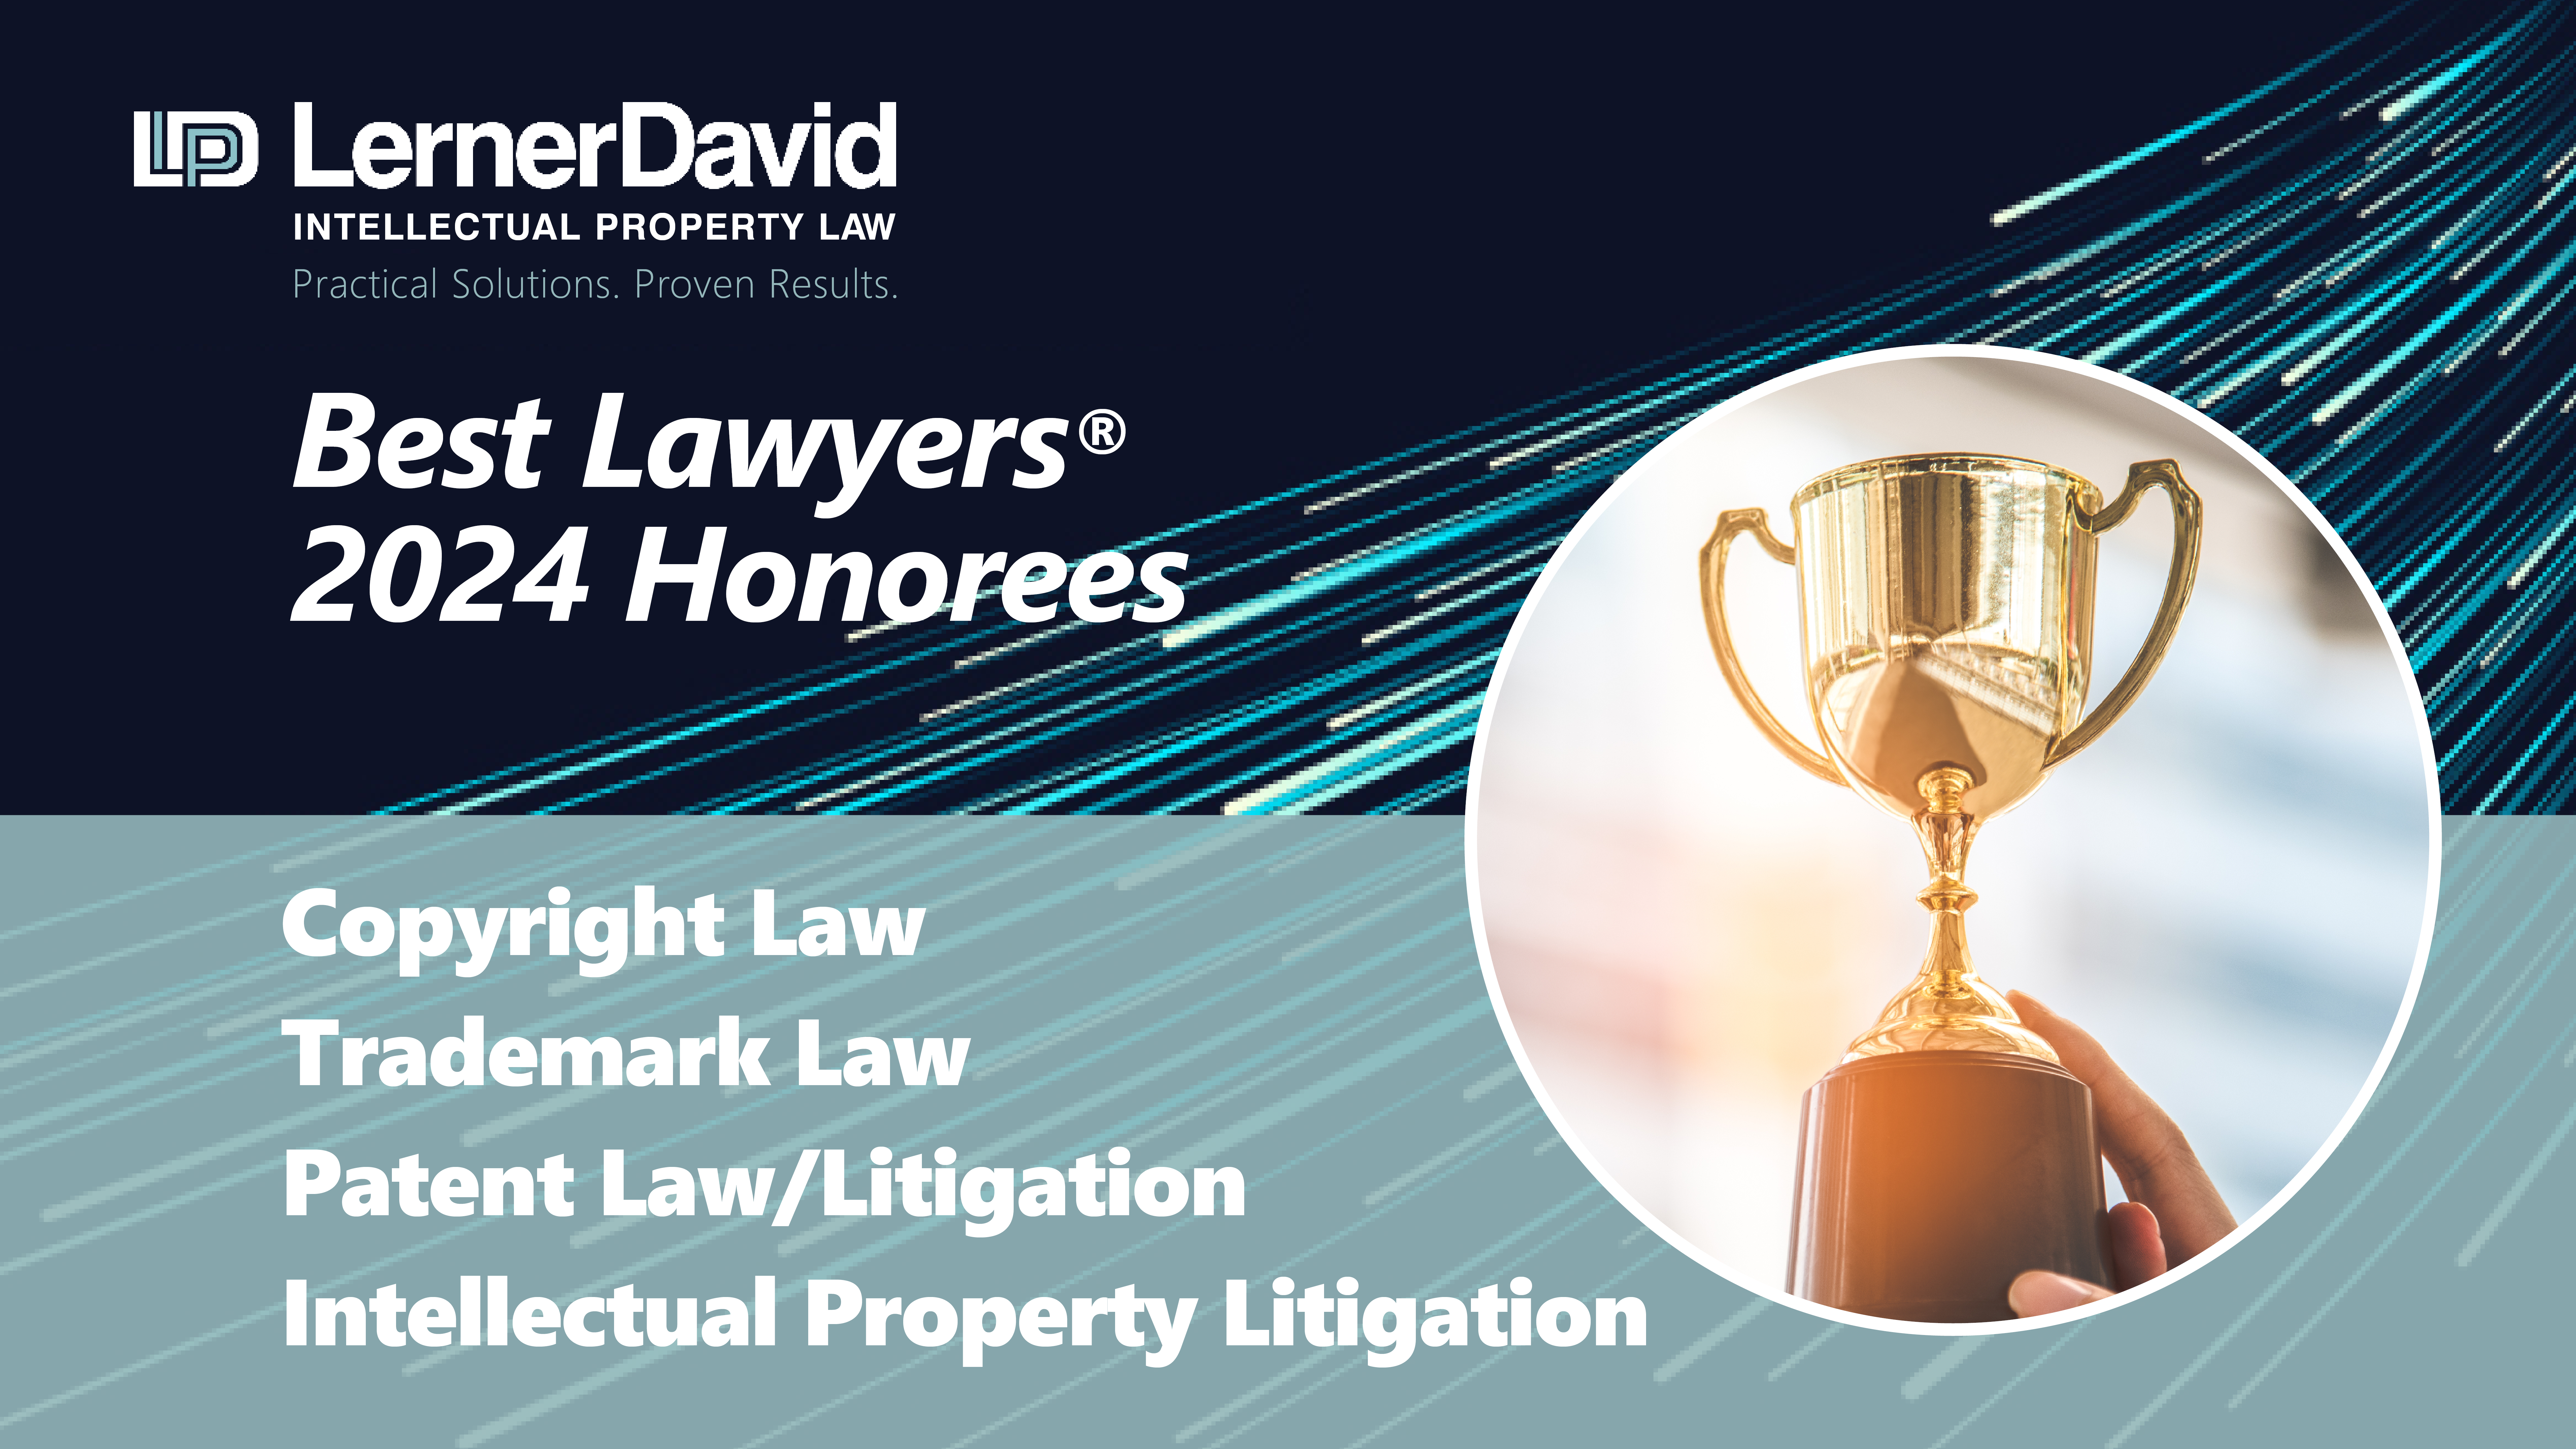 Lerner David Attorney Best Lawyers 2024 Honorees